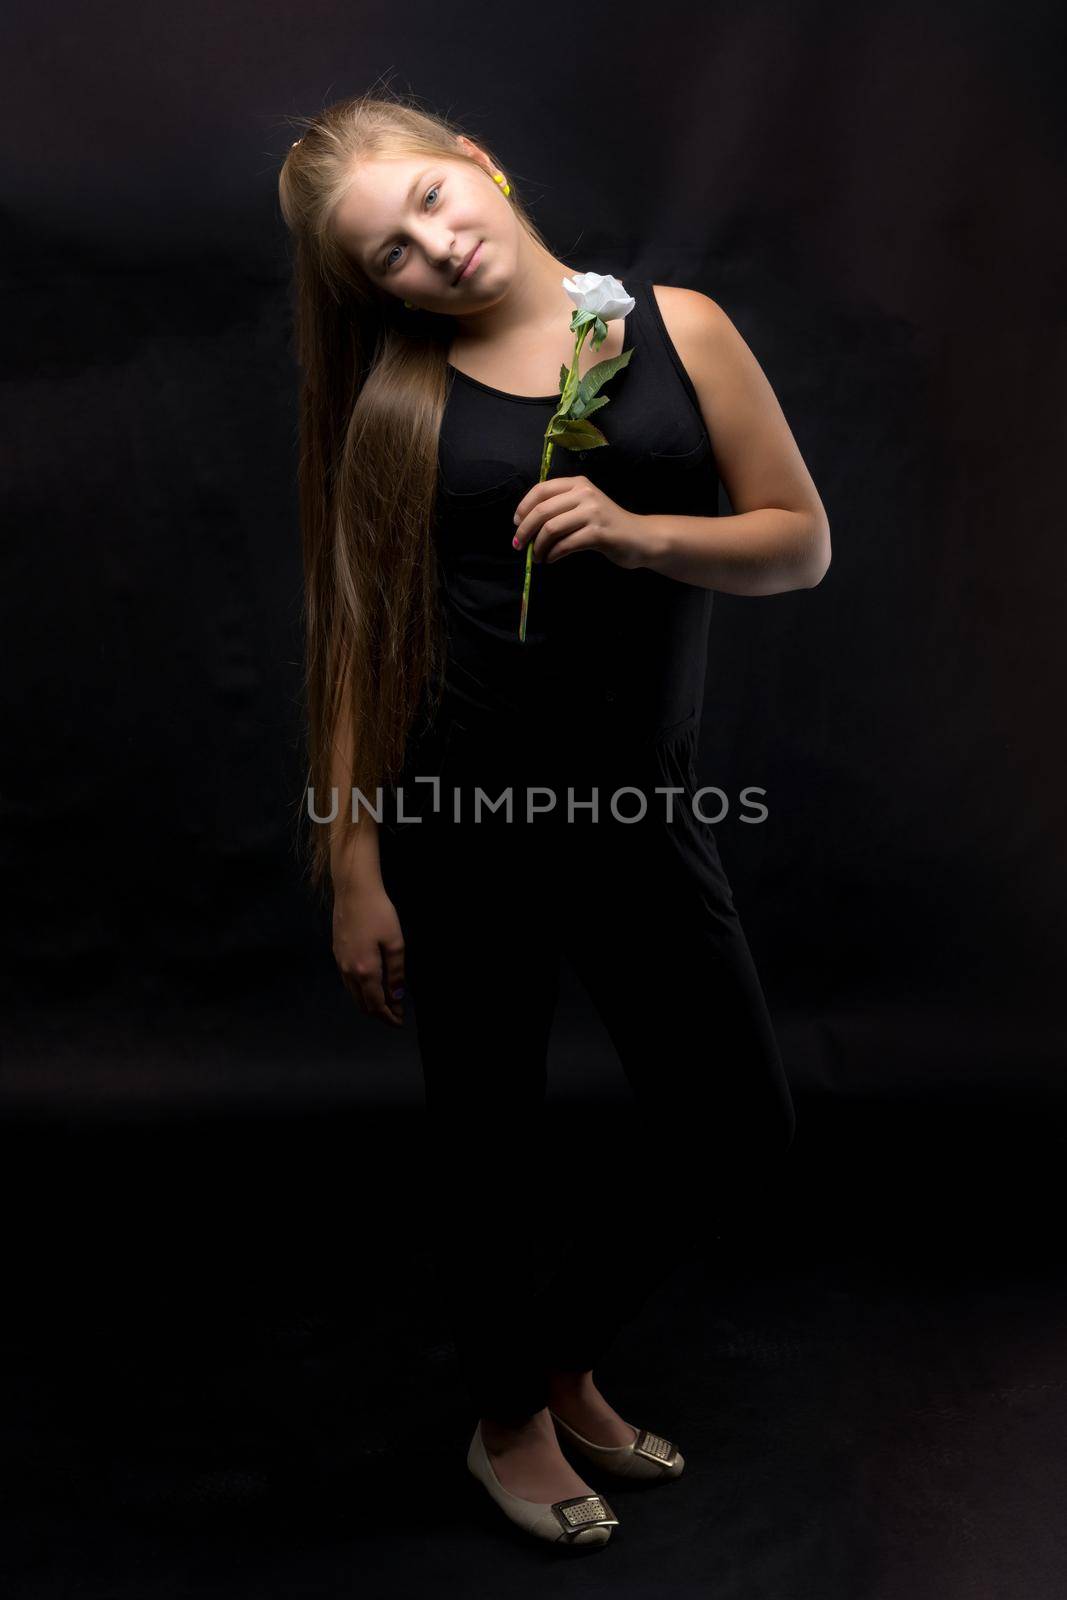 Teenage girl with a flower in her hand by kolesnikov_studio